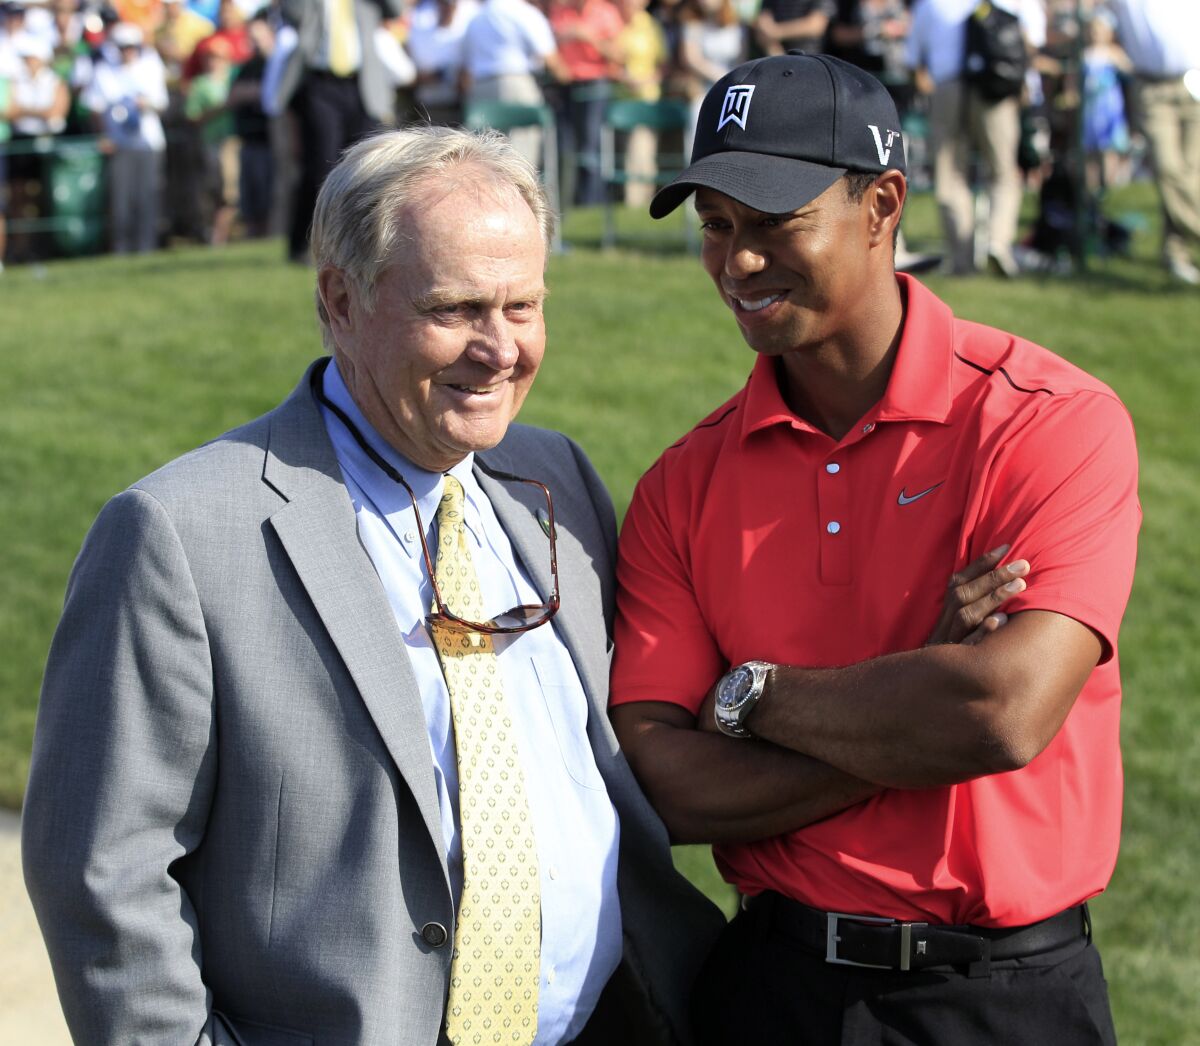 FILE - In this June 3, 2012, file photo, Jack Nicklaus, left, talks with Tiger Woods after Woods won the Memorial golf tournament at the Muirfield Village Golf Club in Dublin, Ohio. The PGA Tour has a deal that would bring a one-time event to Muirfield Village a week before the Memorial, giving it tournaments in consecutive weeks. (AP Photo/Tony Dejak, File)